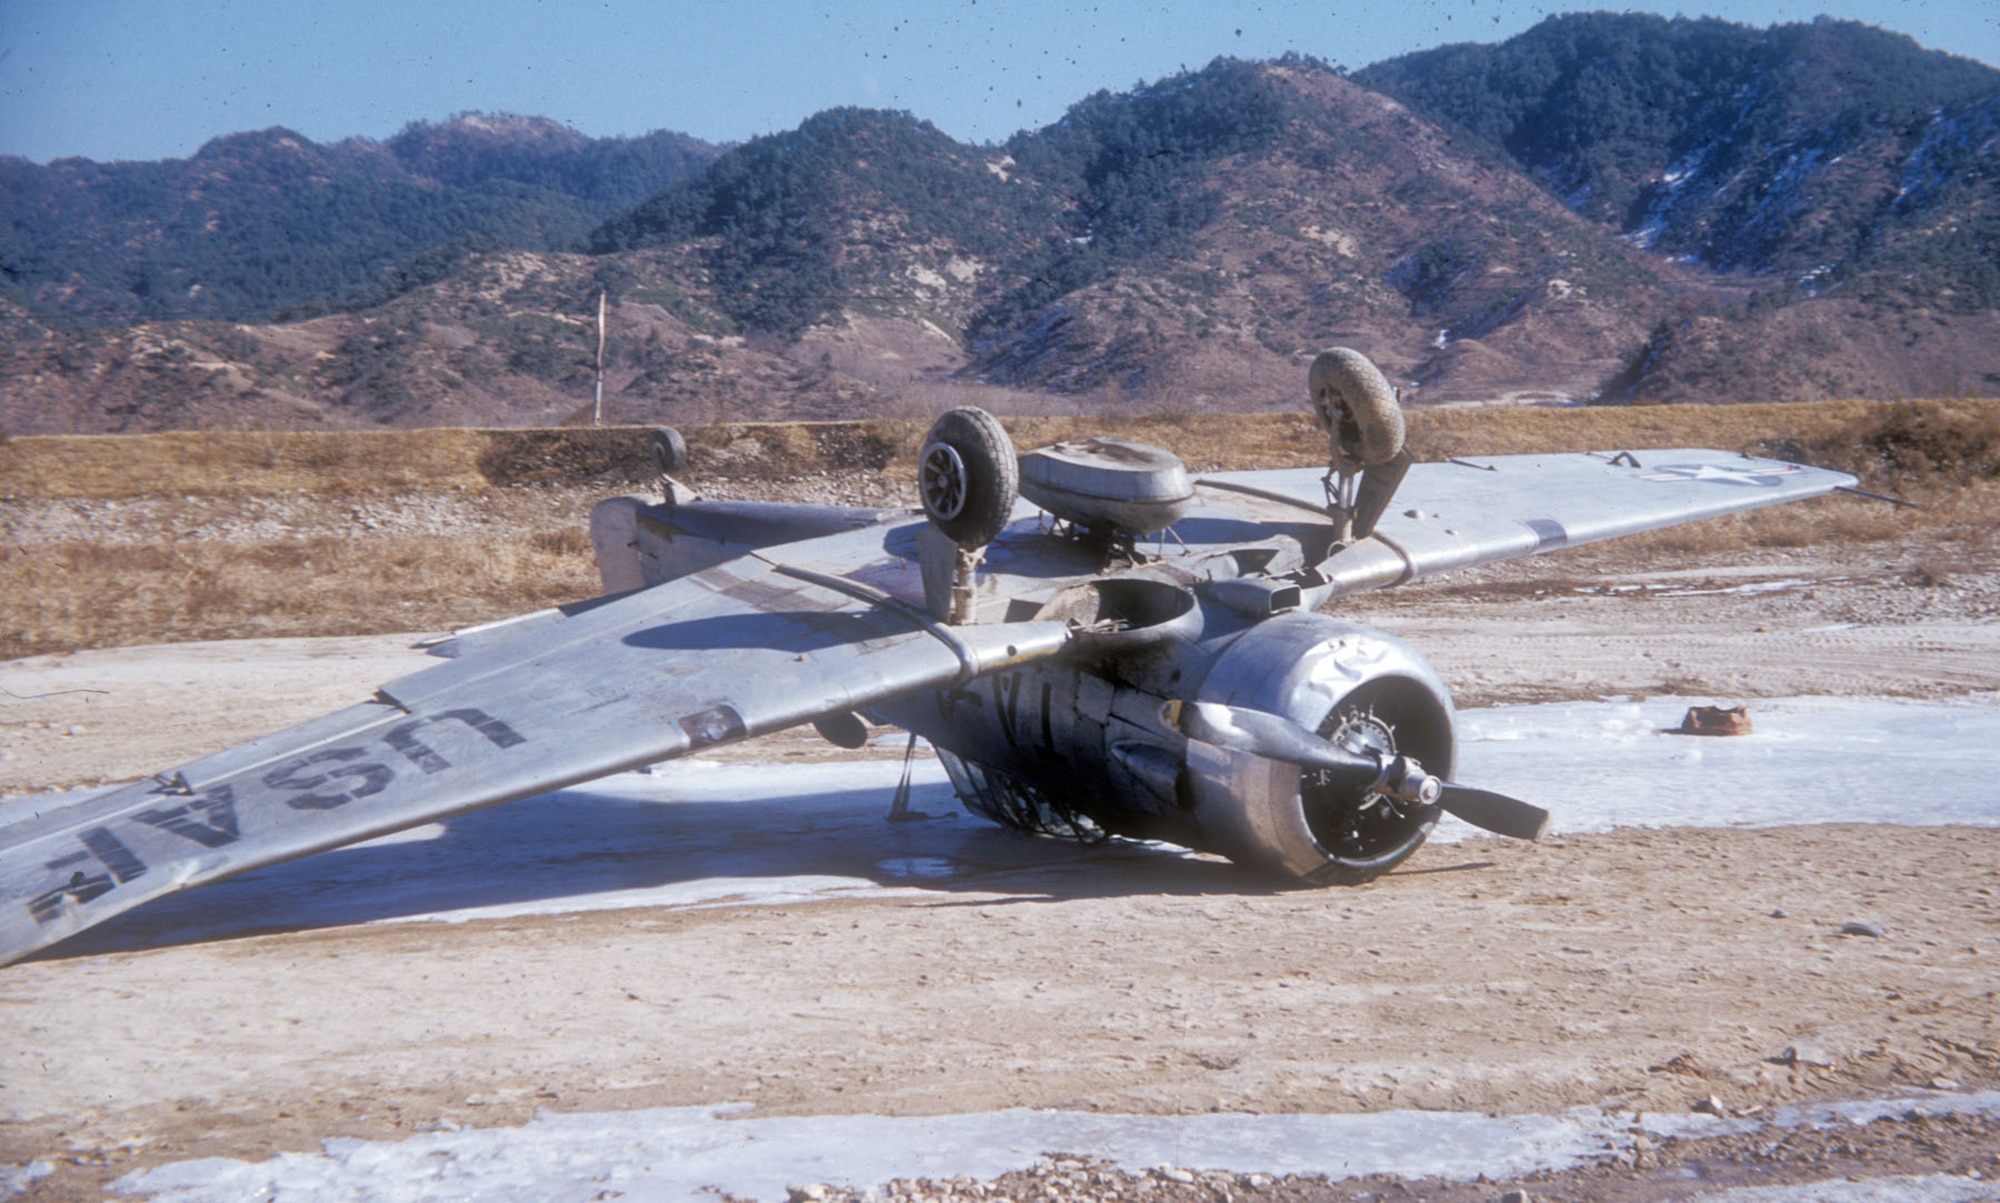 Rough airstrips increased the likelihood of accidents. (U.S. Air Force photo)